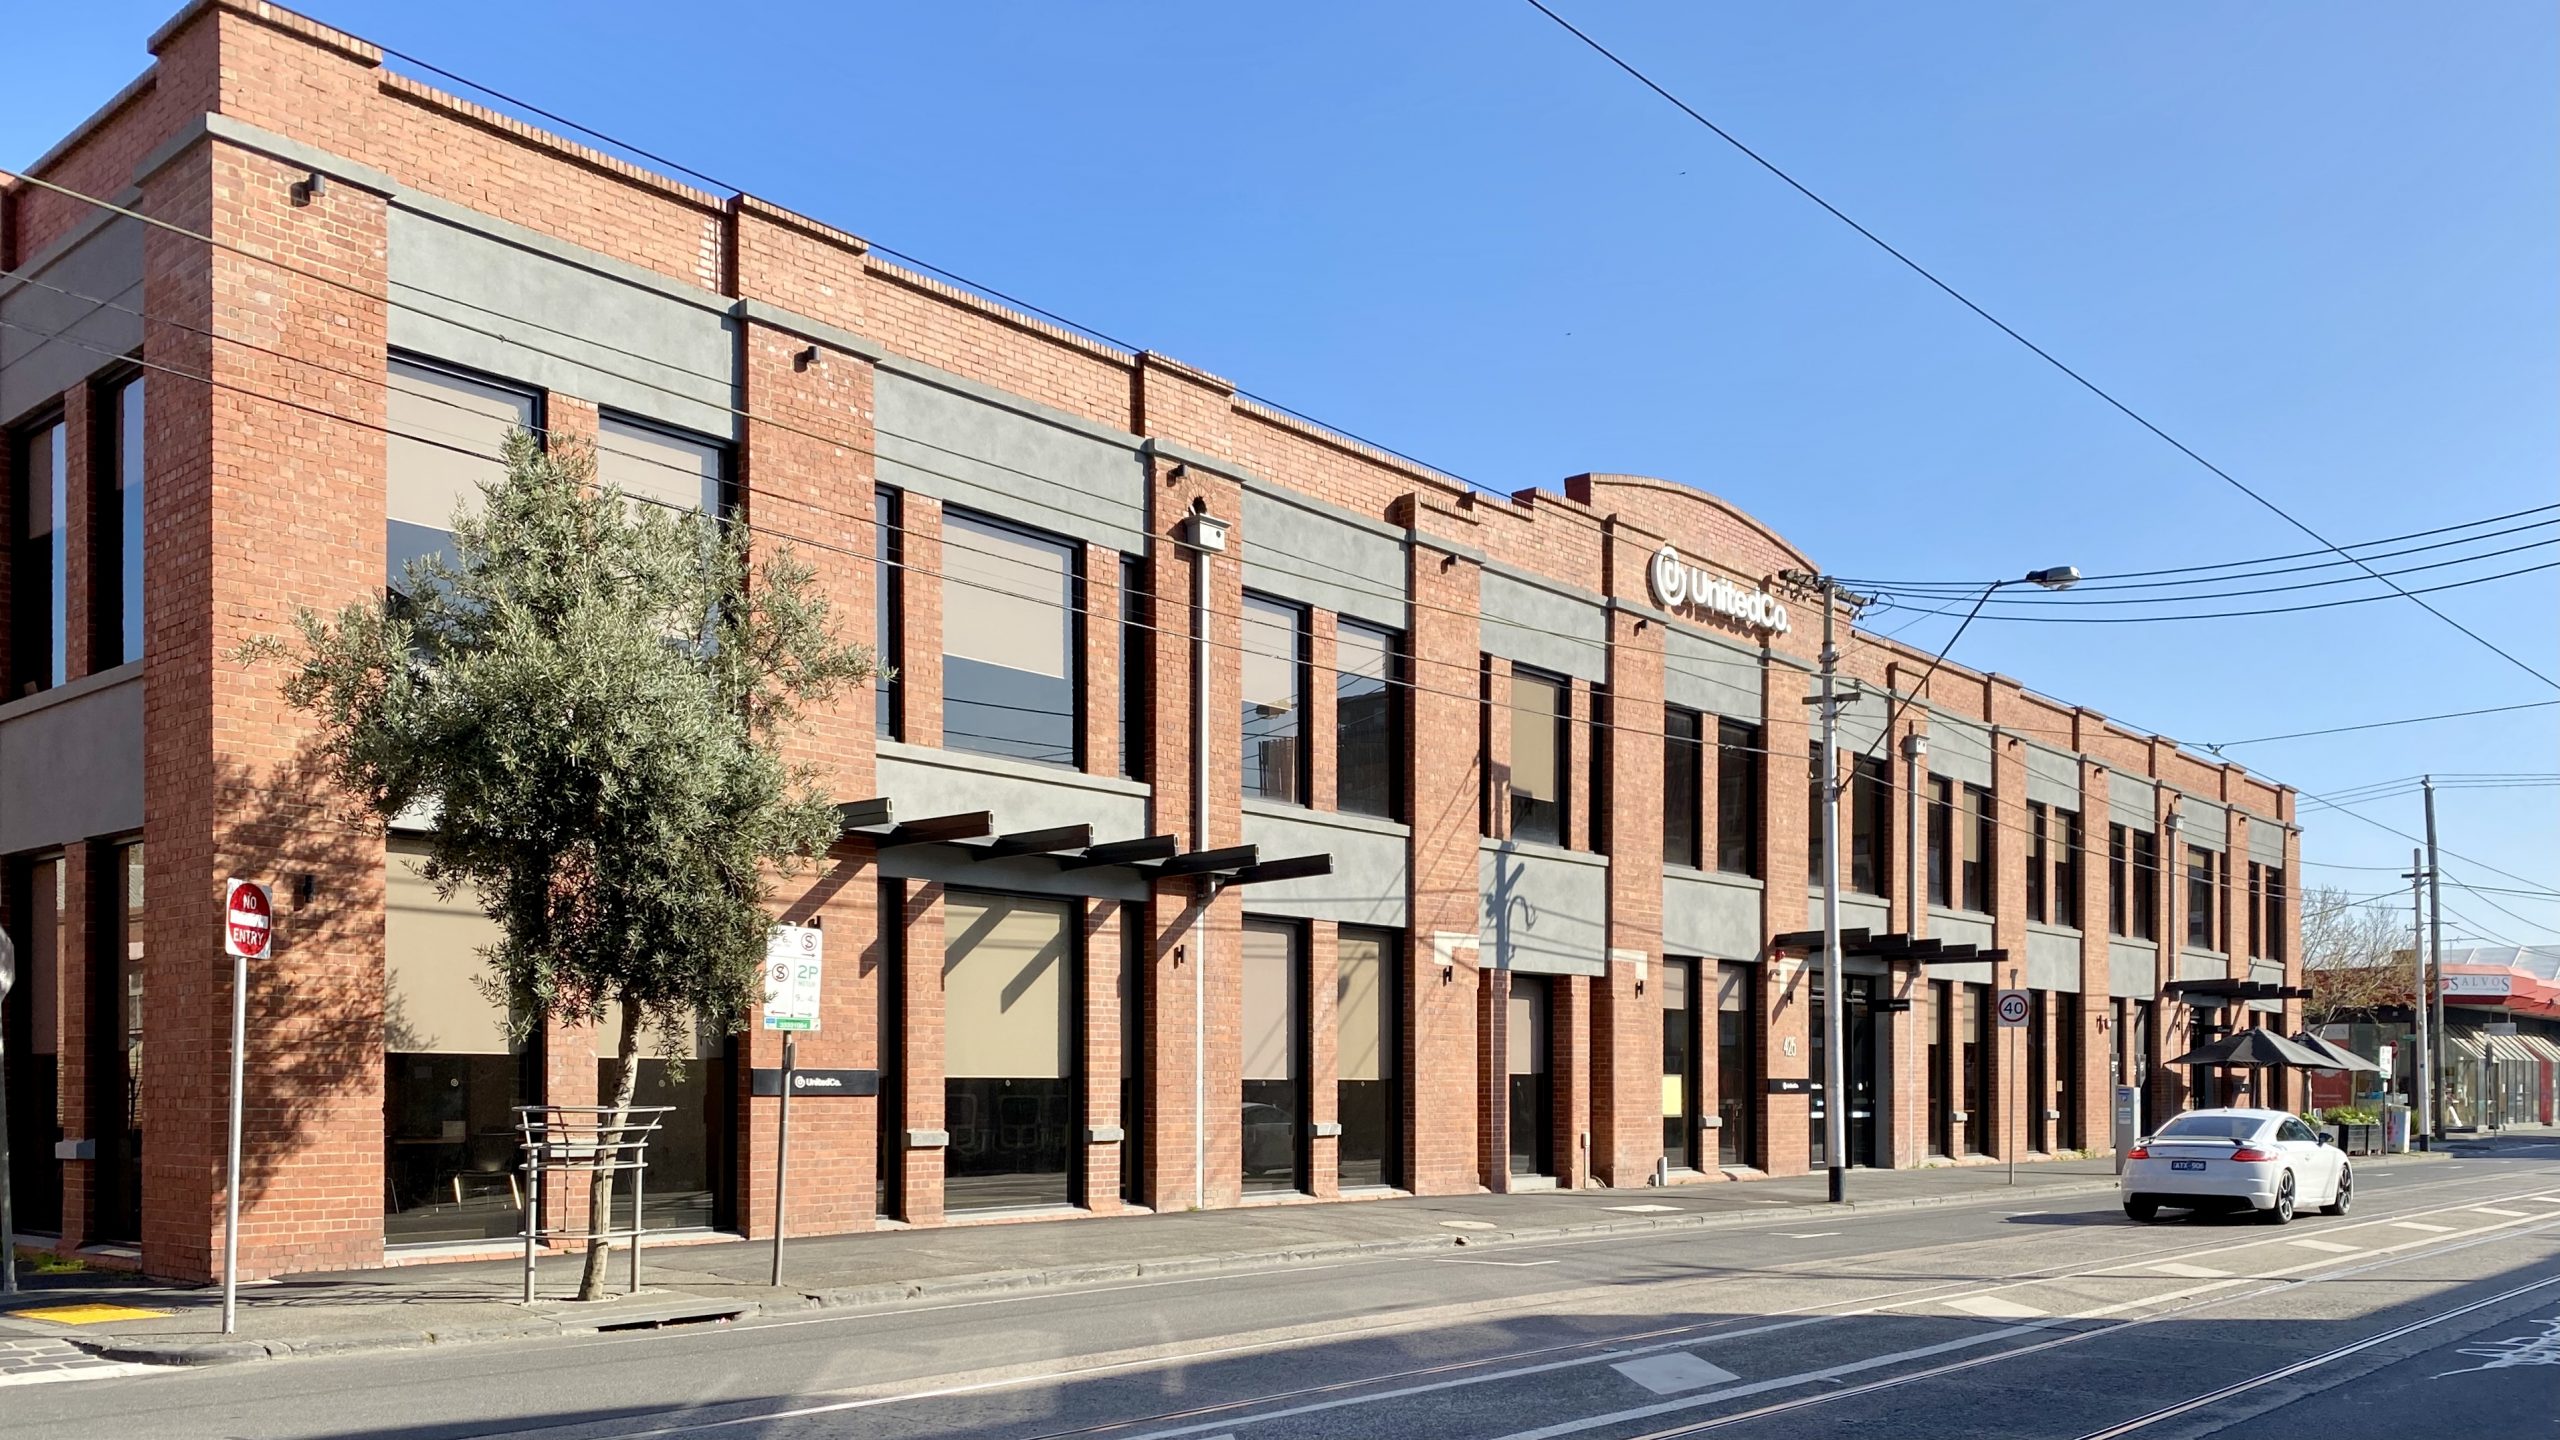 United Co Business centre Coworking Space and flexible office space is located in Smith Street Fitzroy